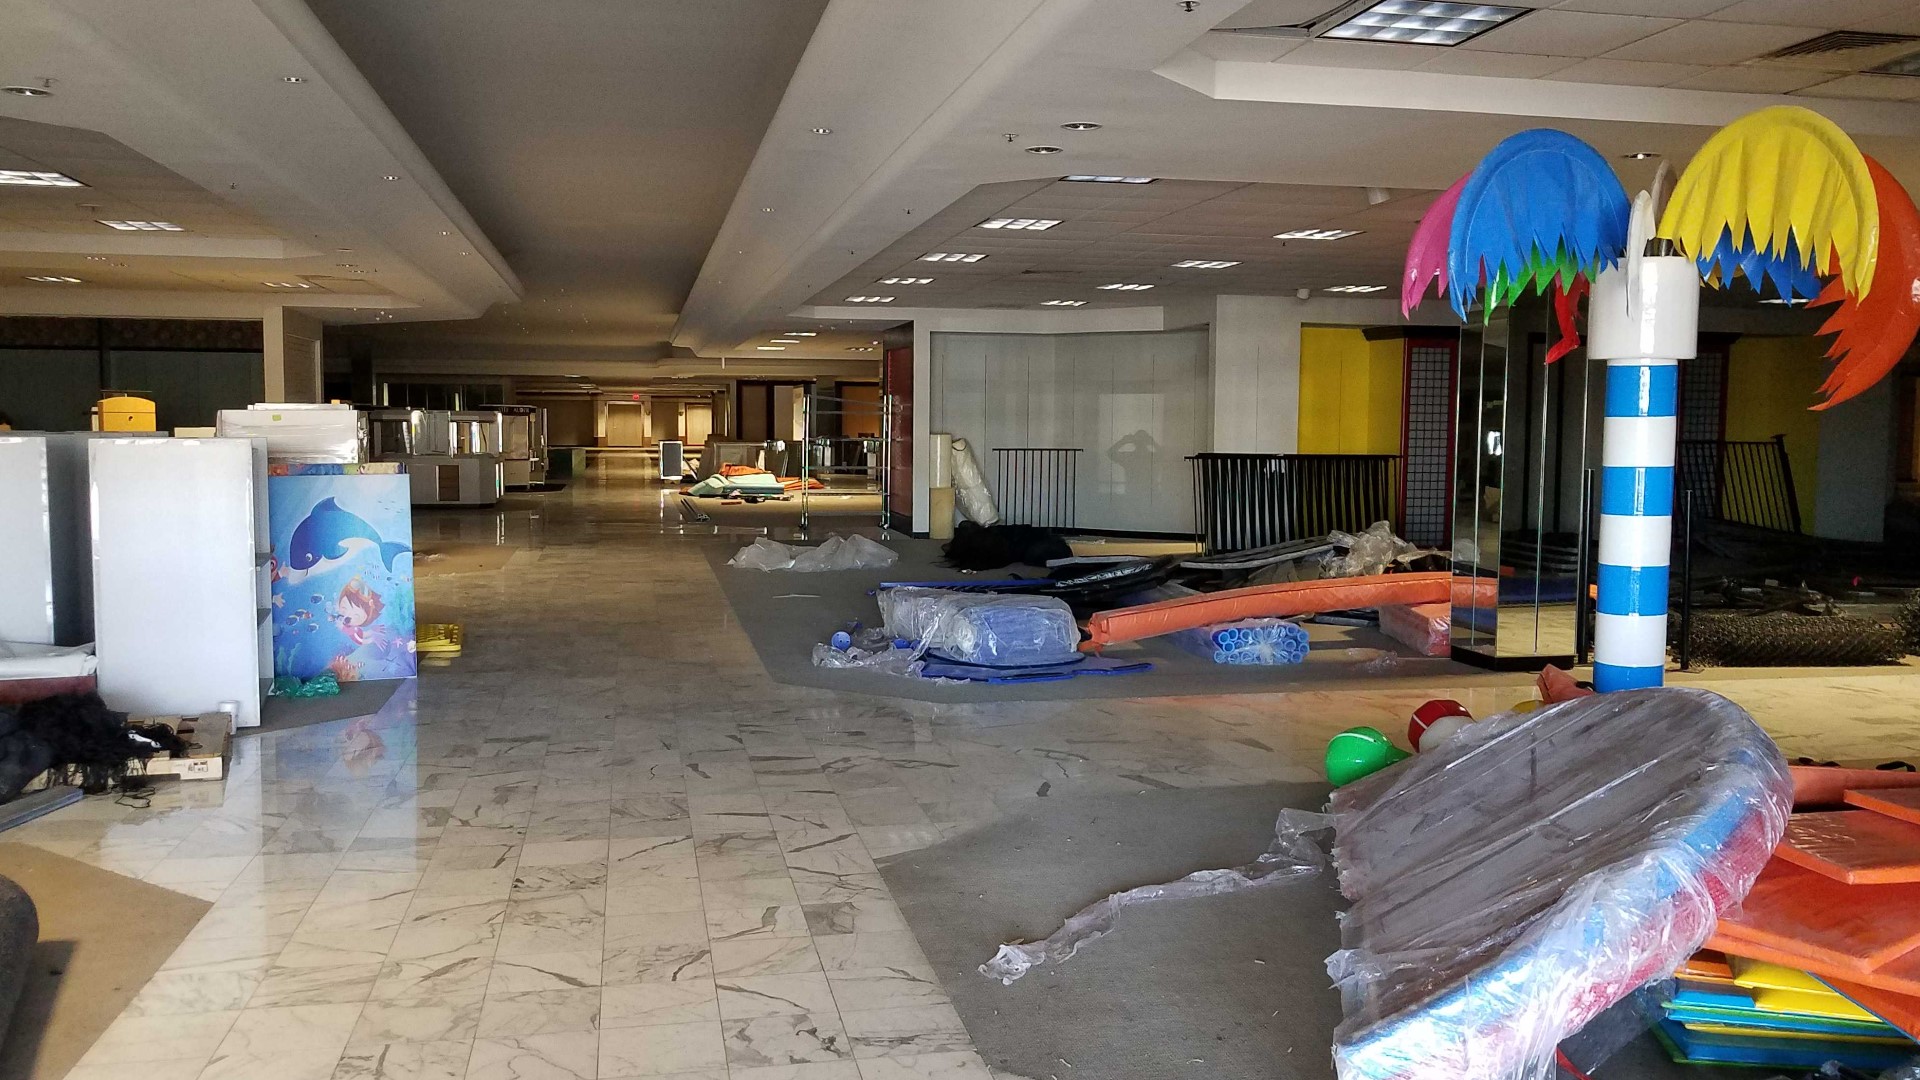 A walk-through of the old Dillard's in the Temple Mall showed not much work had been done to create an aquarium.